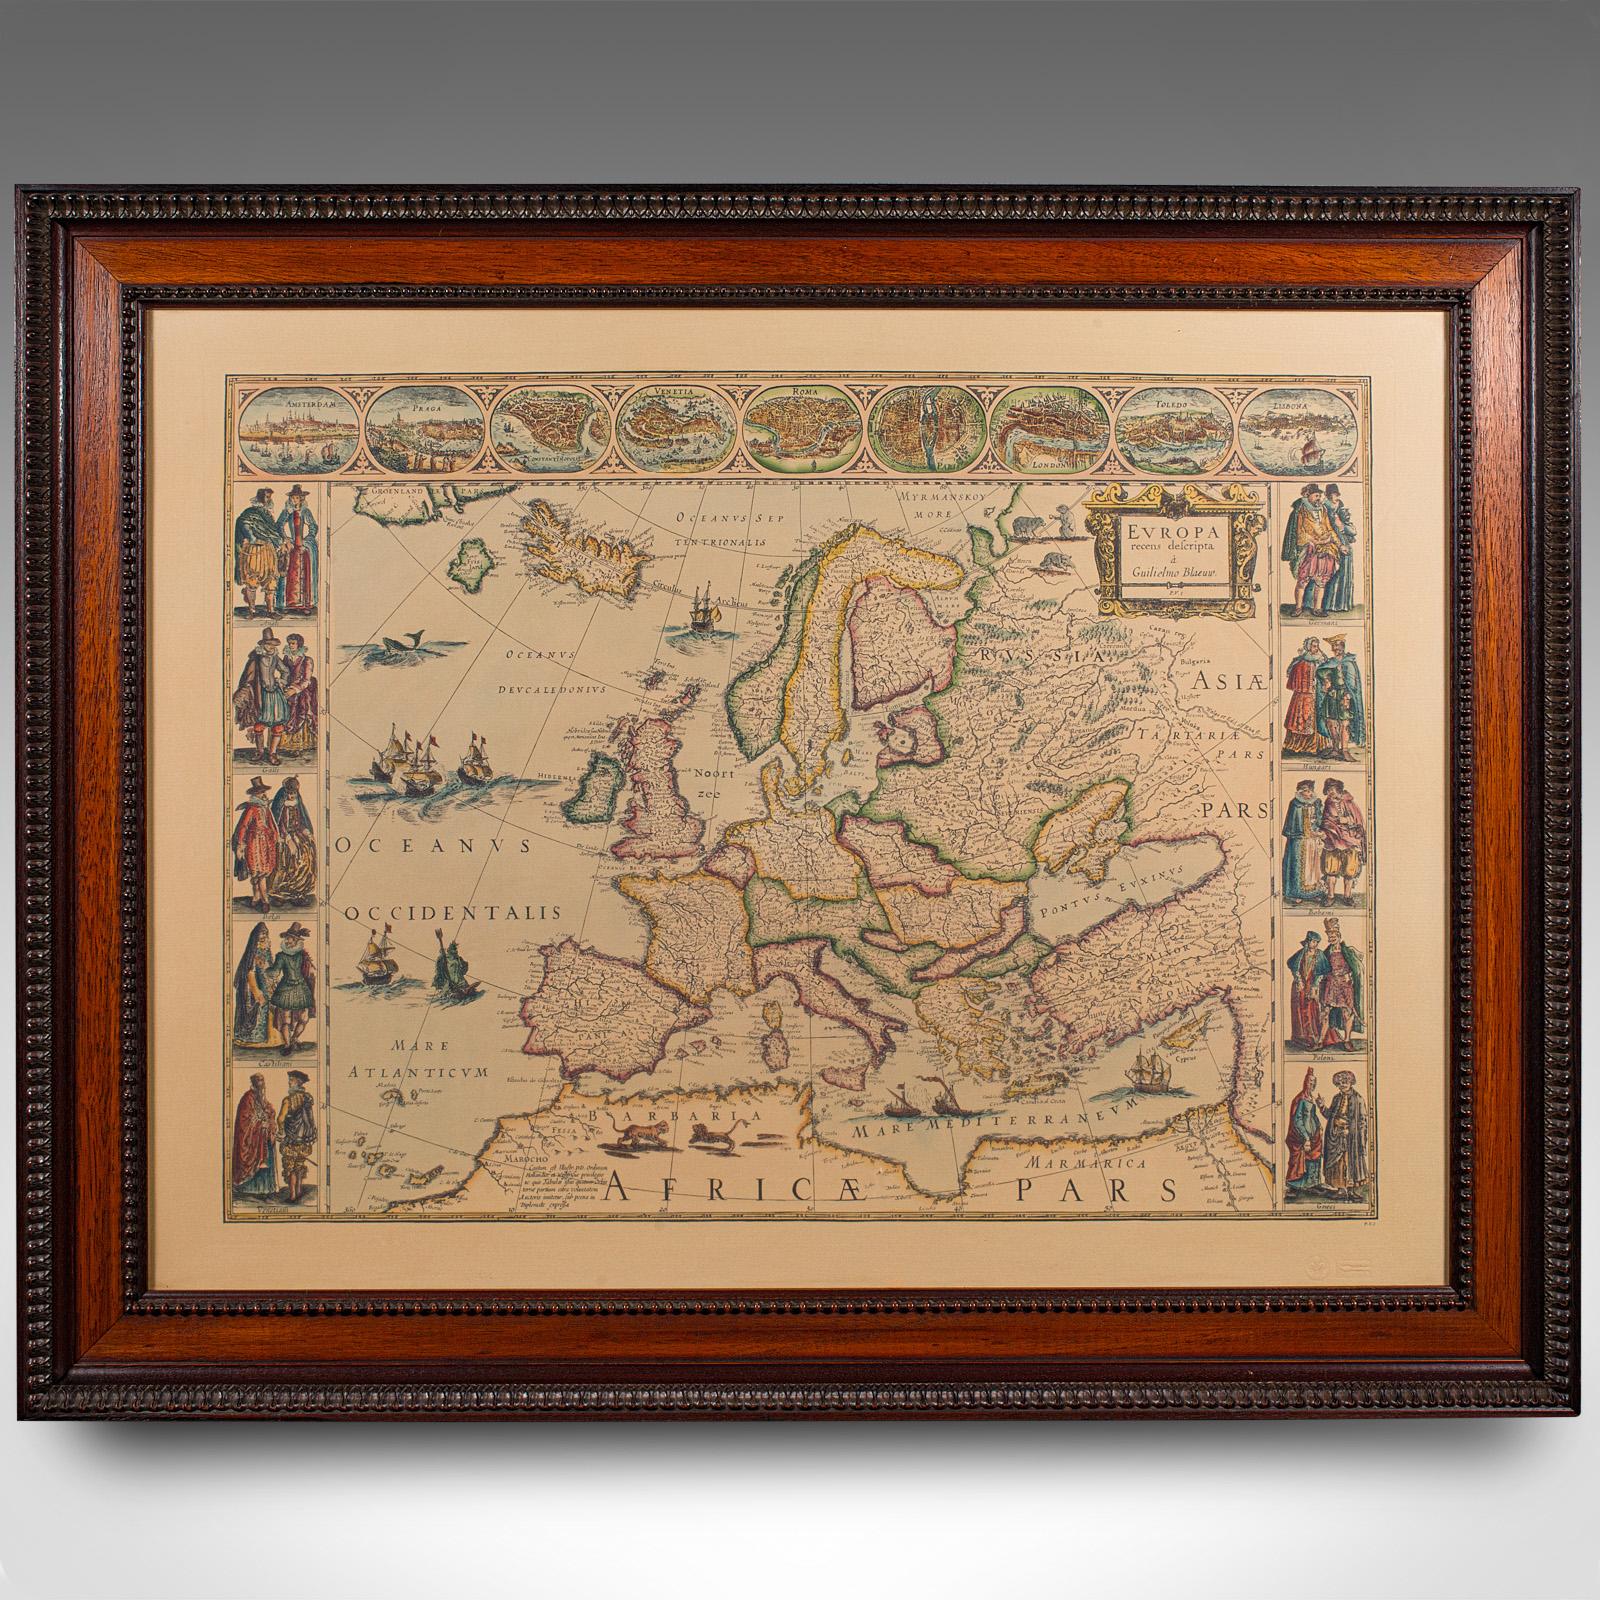 This is a vintage reproduction map of Europe. An American, paper stock cartography print in frame after the work by Blaeuw, dating to the late 20th century, circa 1970.

Fascinating reproduction of the historic cartography by Guilielmo Blaeuw (1571